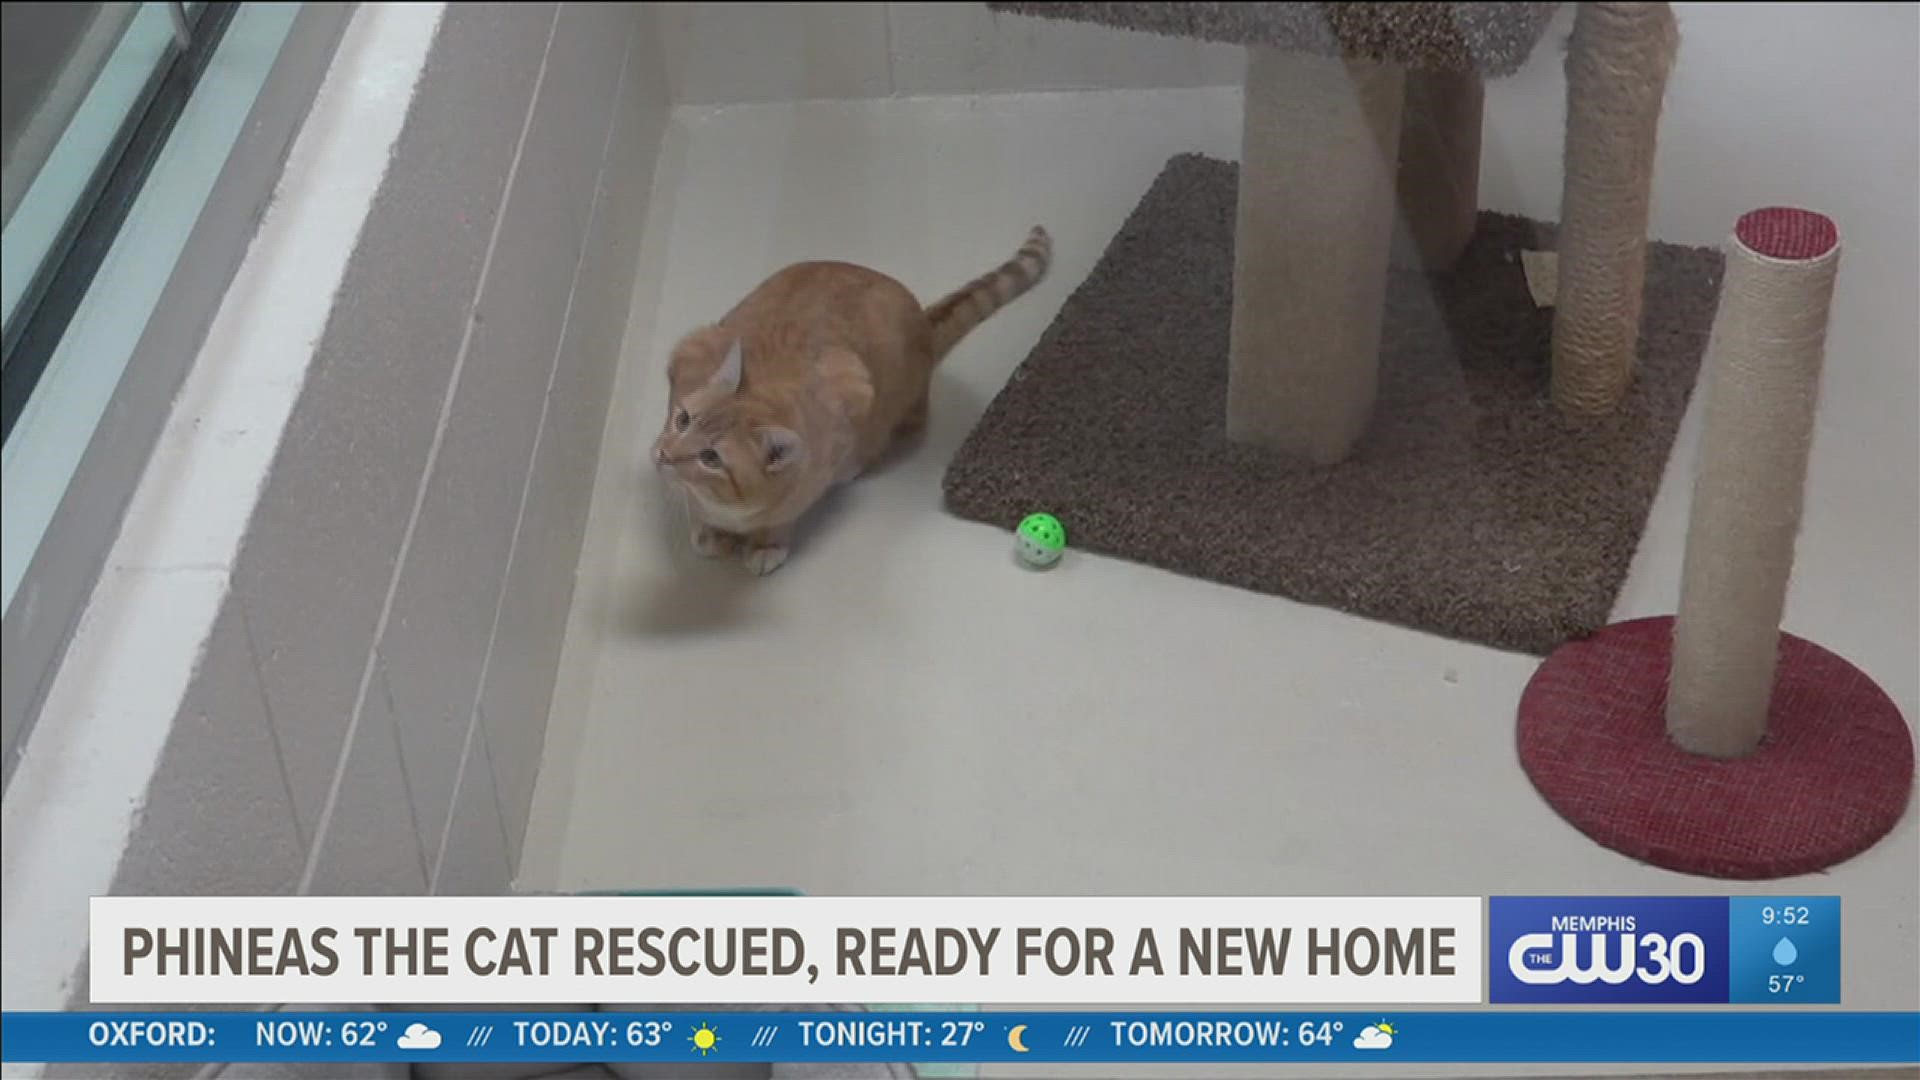 Phineas the cat is ready to love a new family and looking for a fur-ever home.